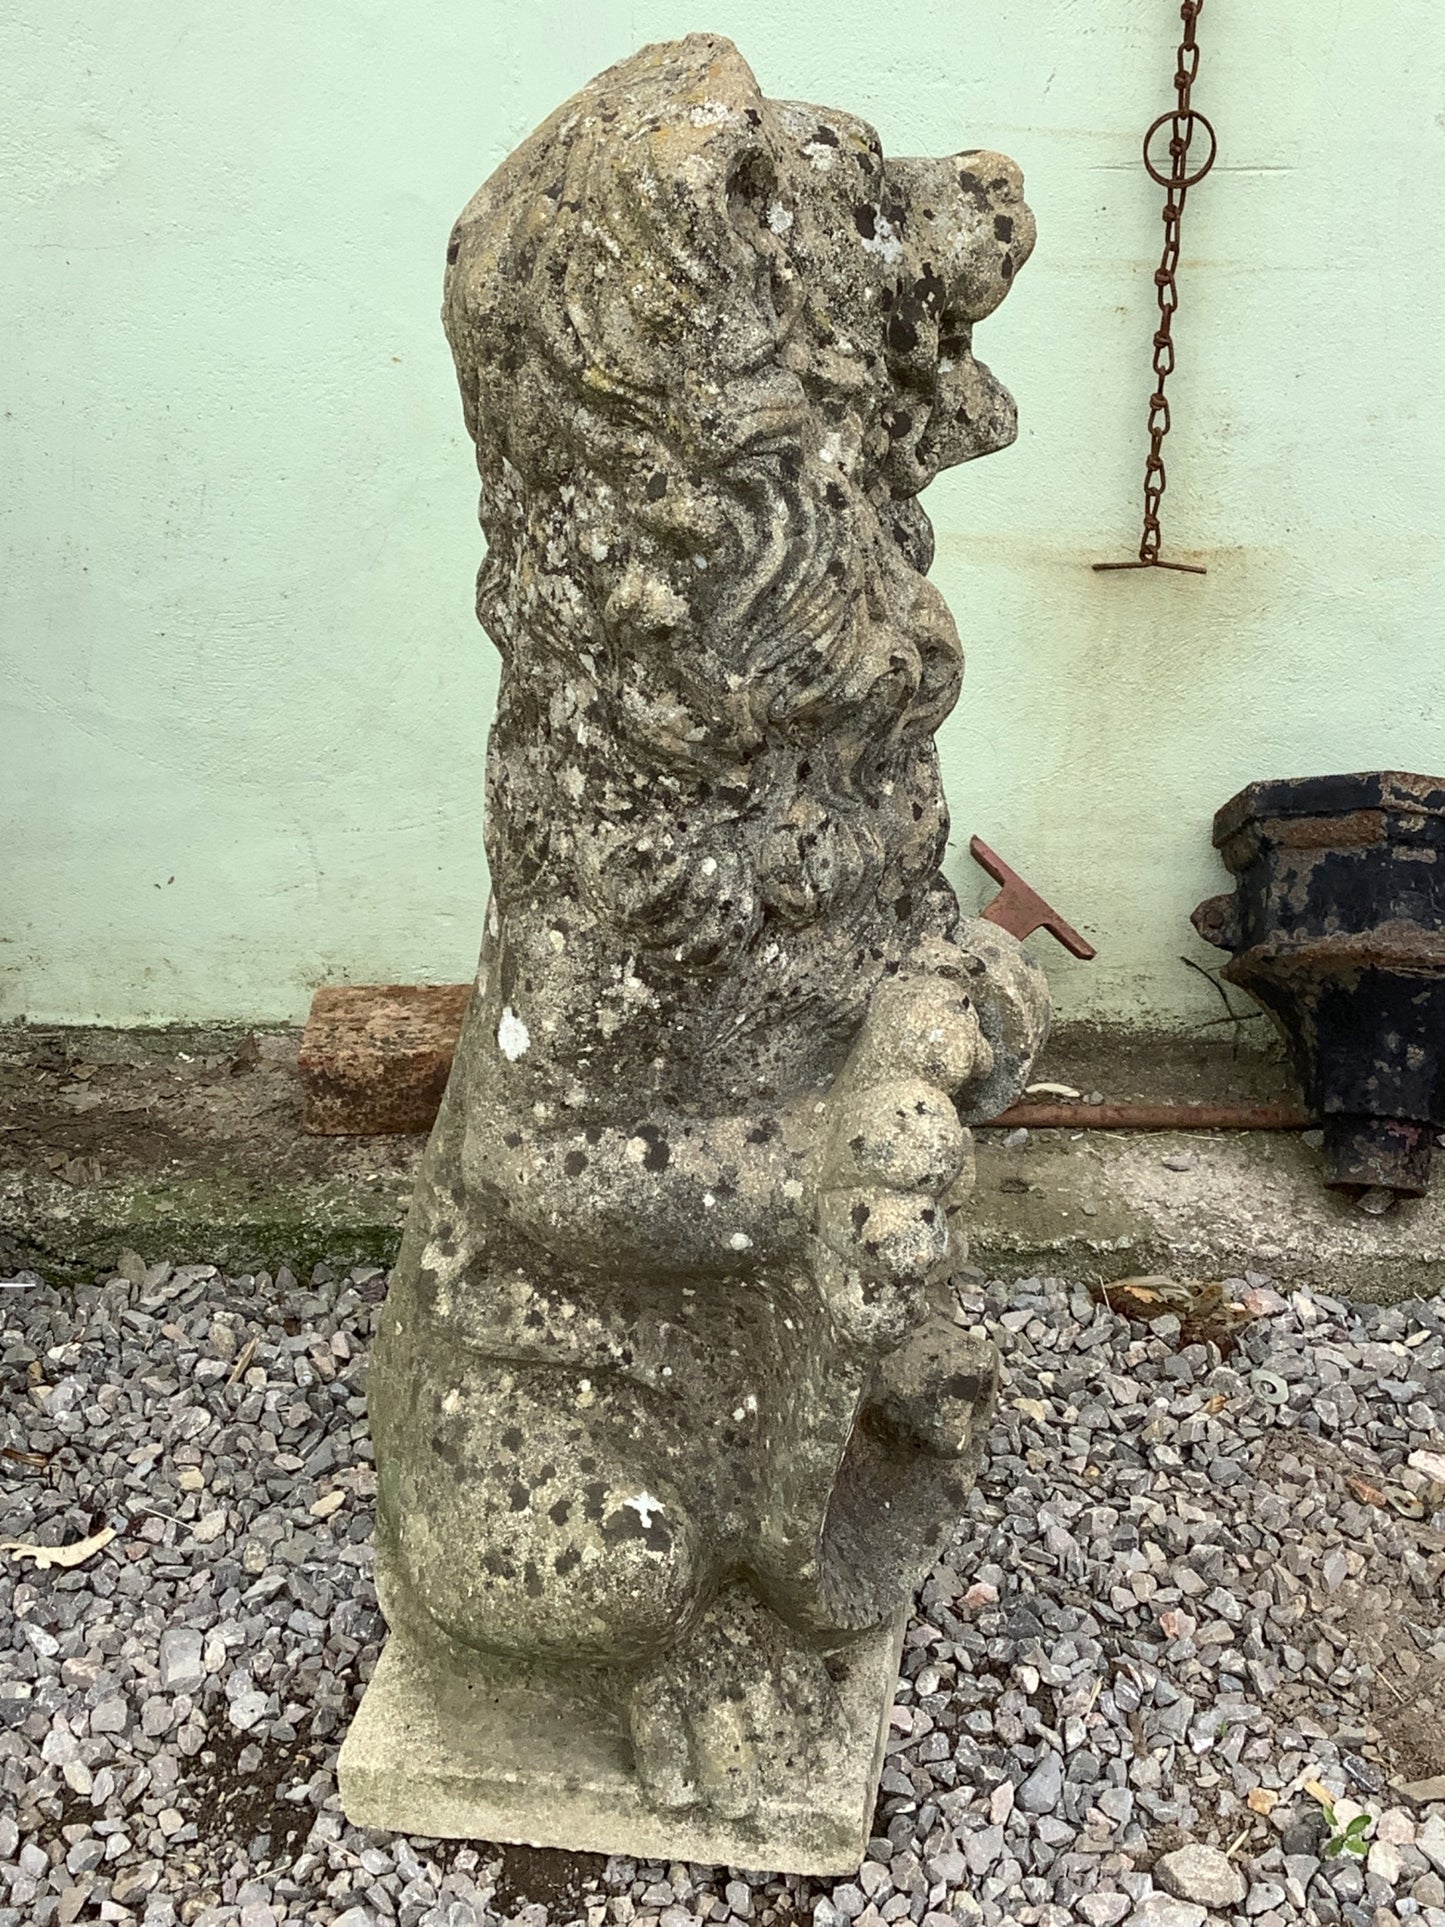 3'3"H 1'2" W Weathered Old Heavy Cast Stone Sitting Lion Statue Garden Feature